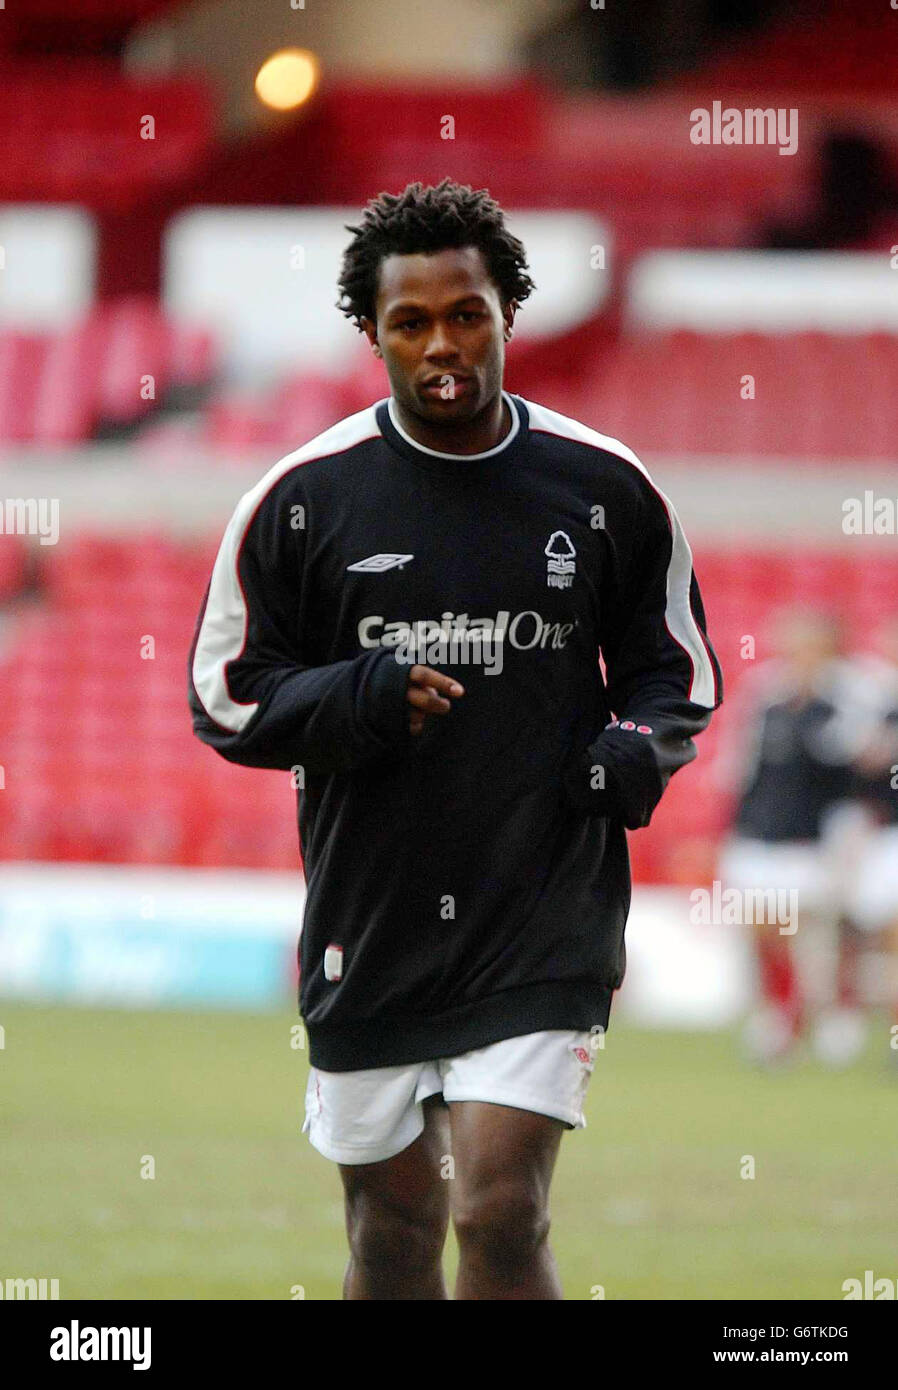 Nottingham Forest's David Marsden ahead of the Nationwide Division One match against Crystal Palace at the City Ground, Nottingham. NO UNOFFICIAL CLUB WEBSITE USE. Stock Photo